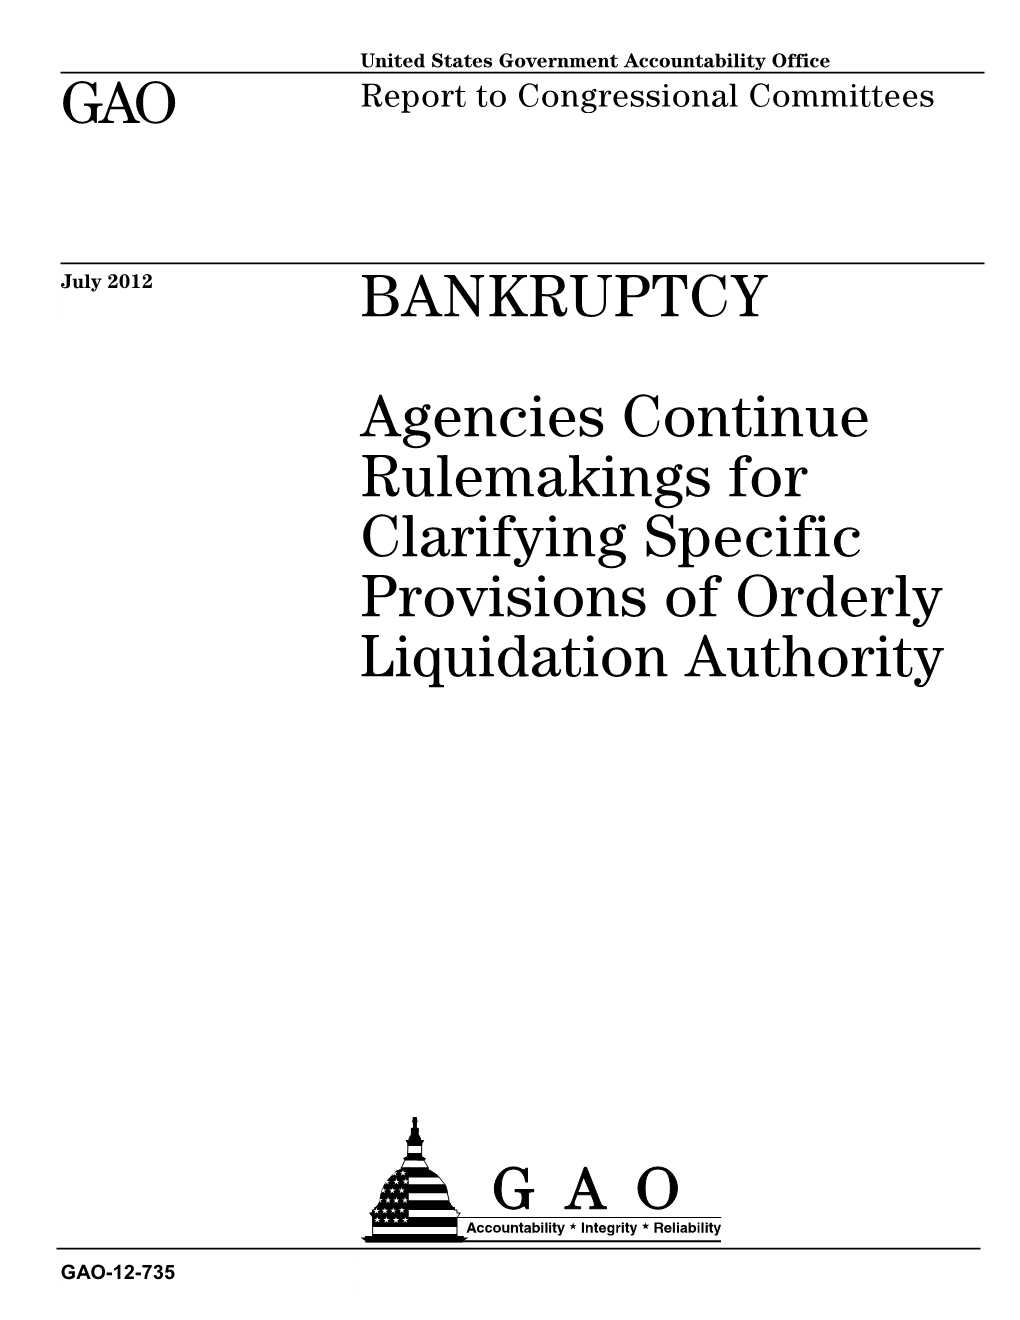 GAO-12-735, Bankruptcy: Agencies Continue Rulemaking for Clarifying